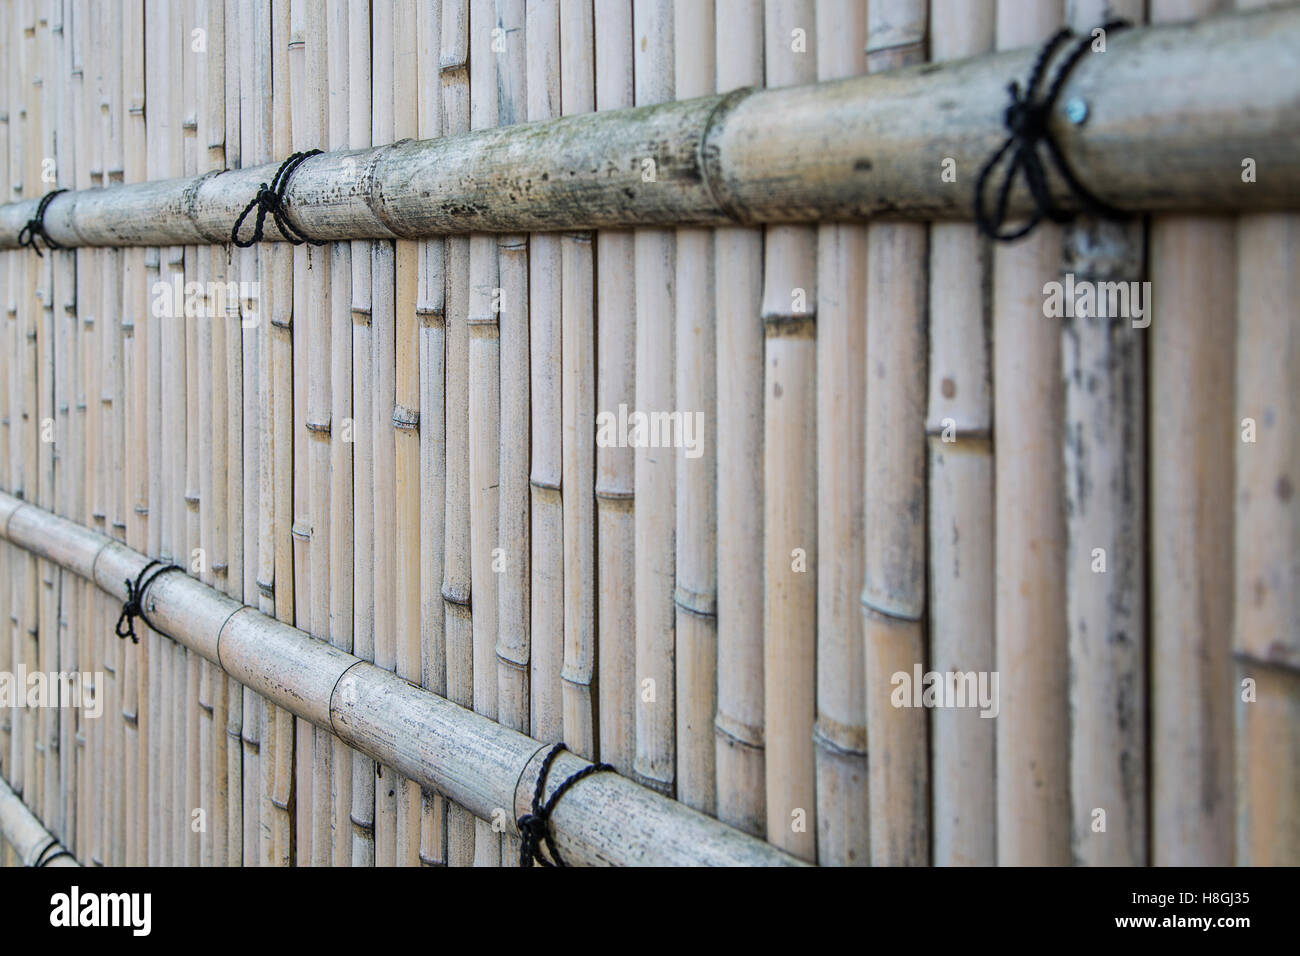 Closeup view of detail from the bamboo fence Stock Photo